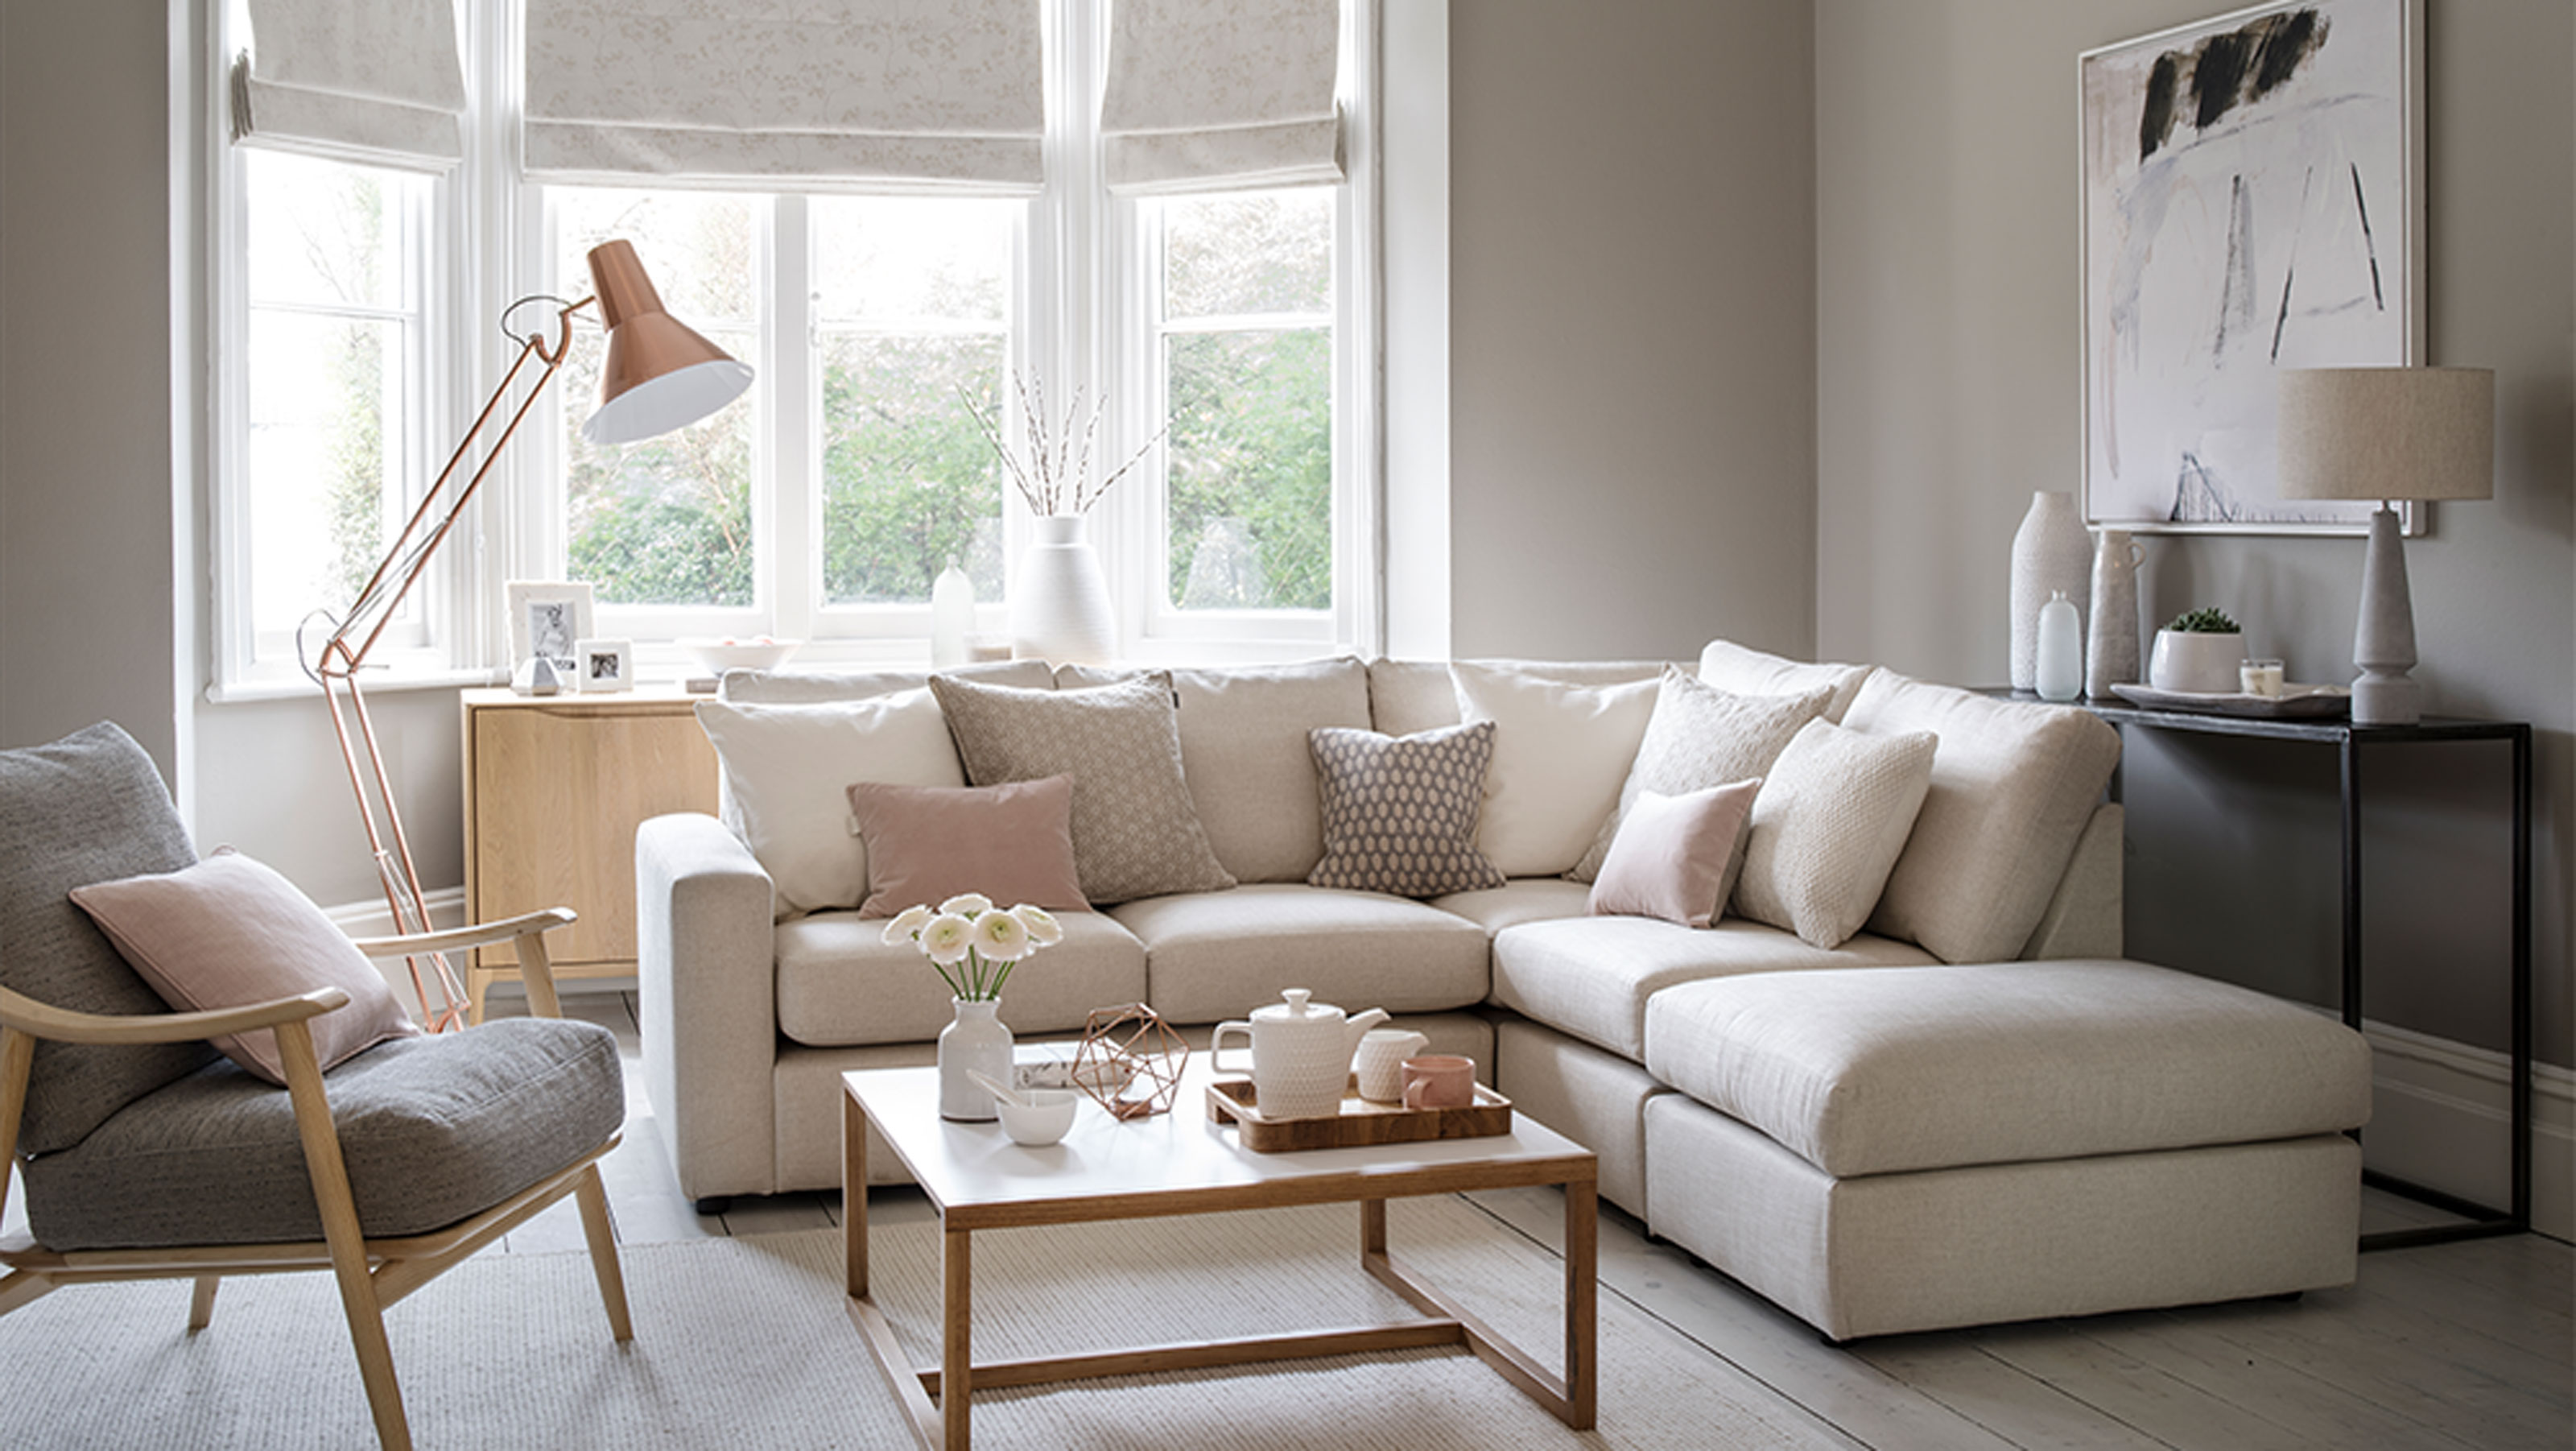 Beige Living Room Ideas - Stay Neutral With This Easygoing Colourway |  Ideal Home